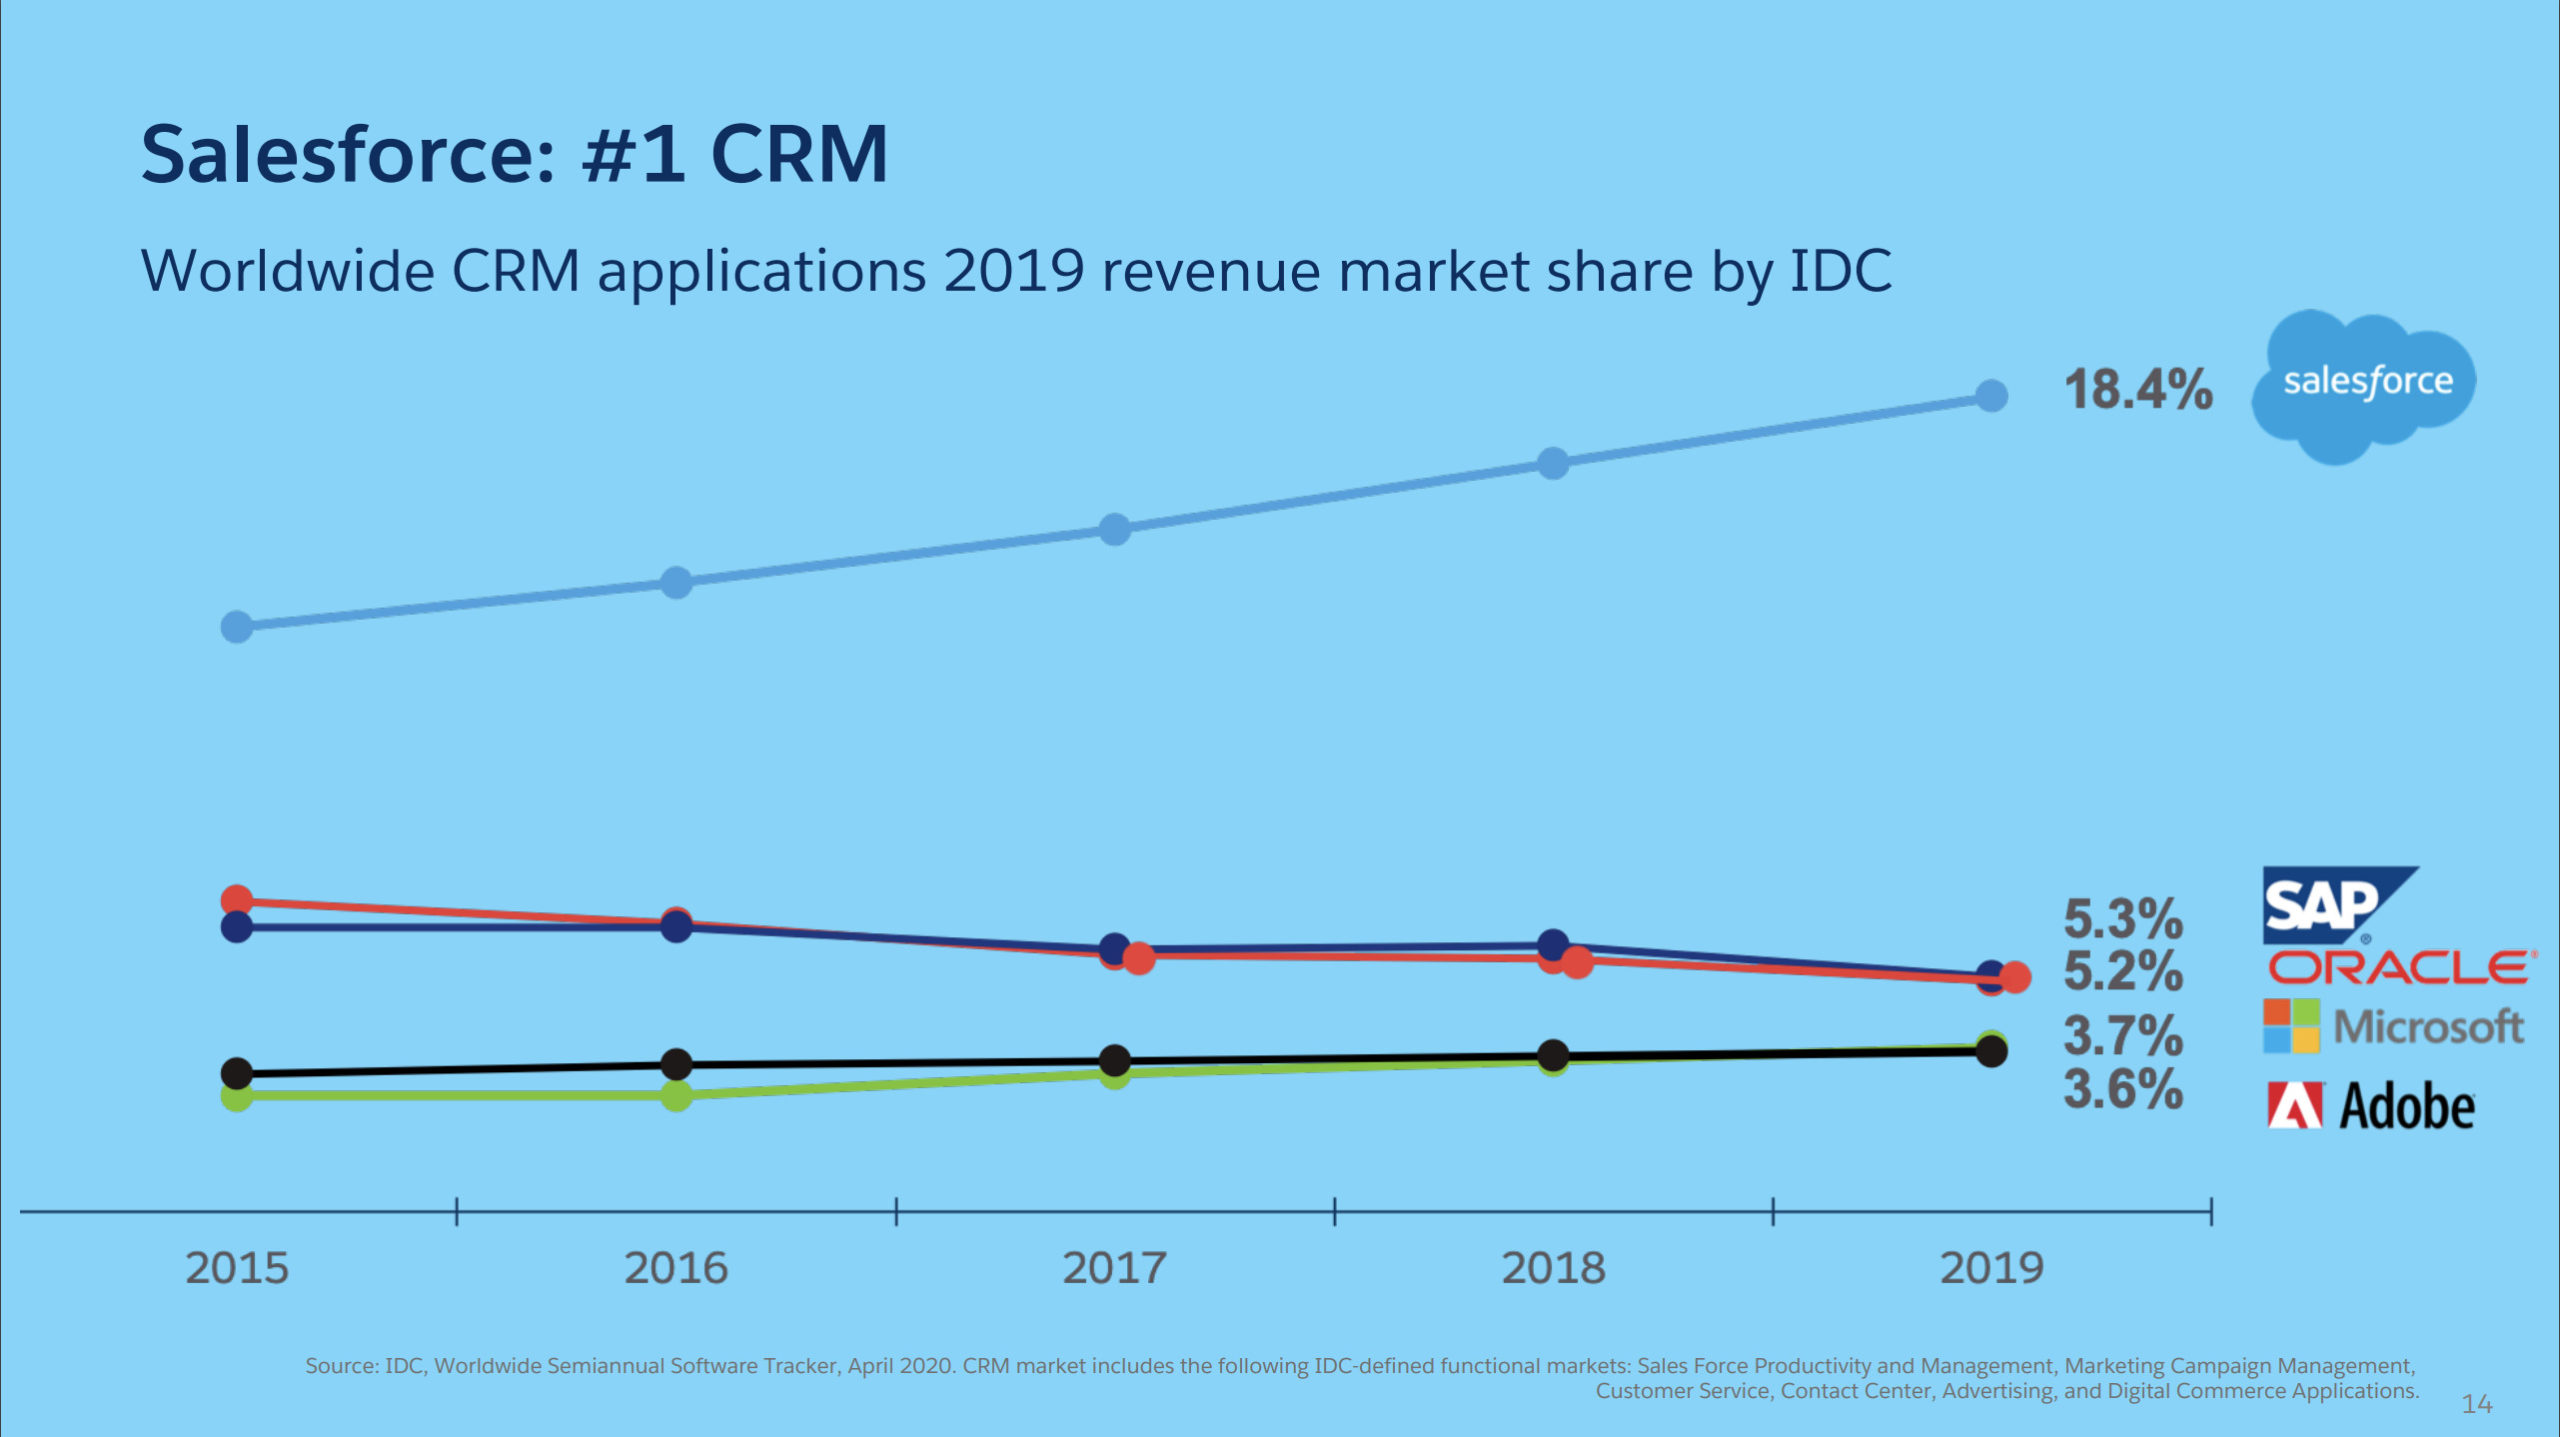 Slide from Salesforce Q2 earnings presentation showing dominance in CRM